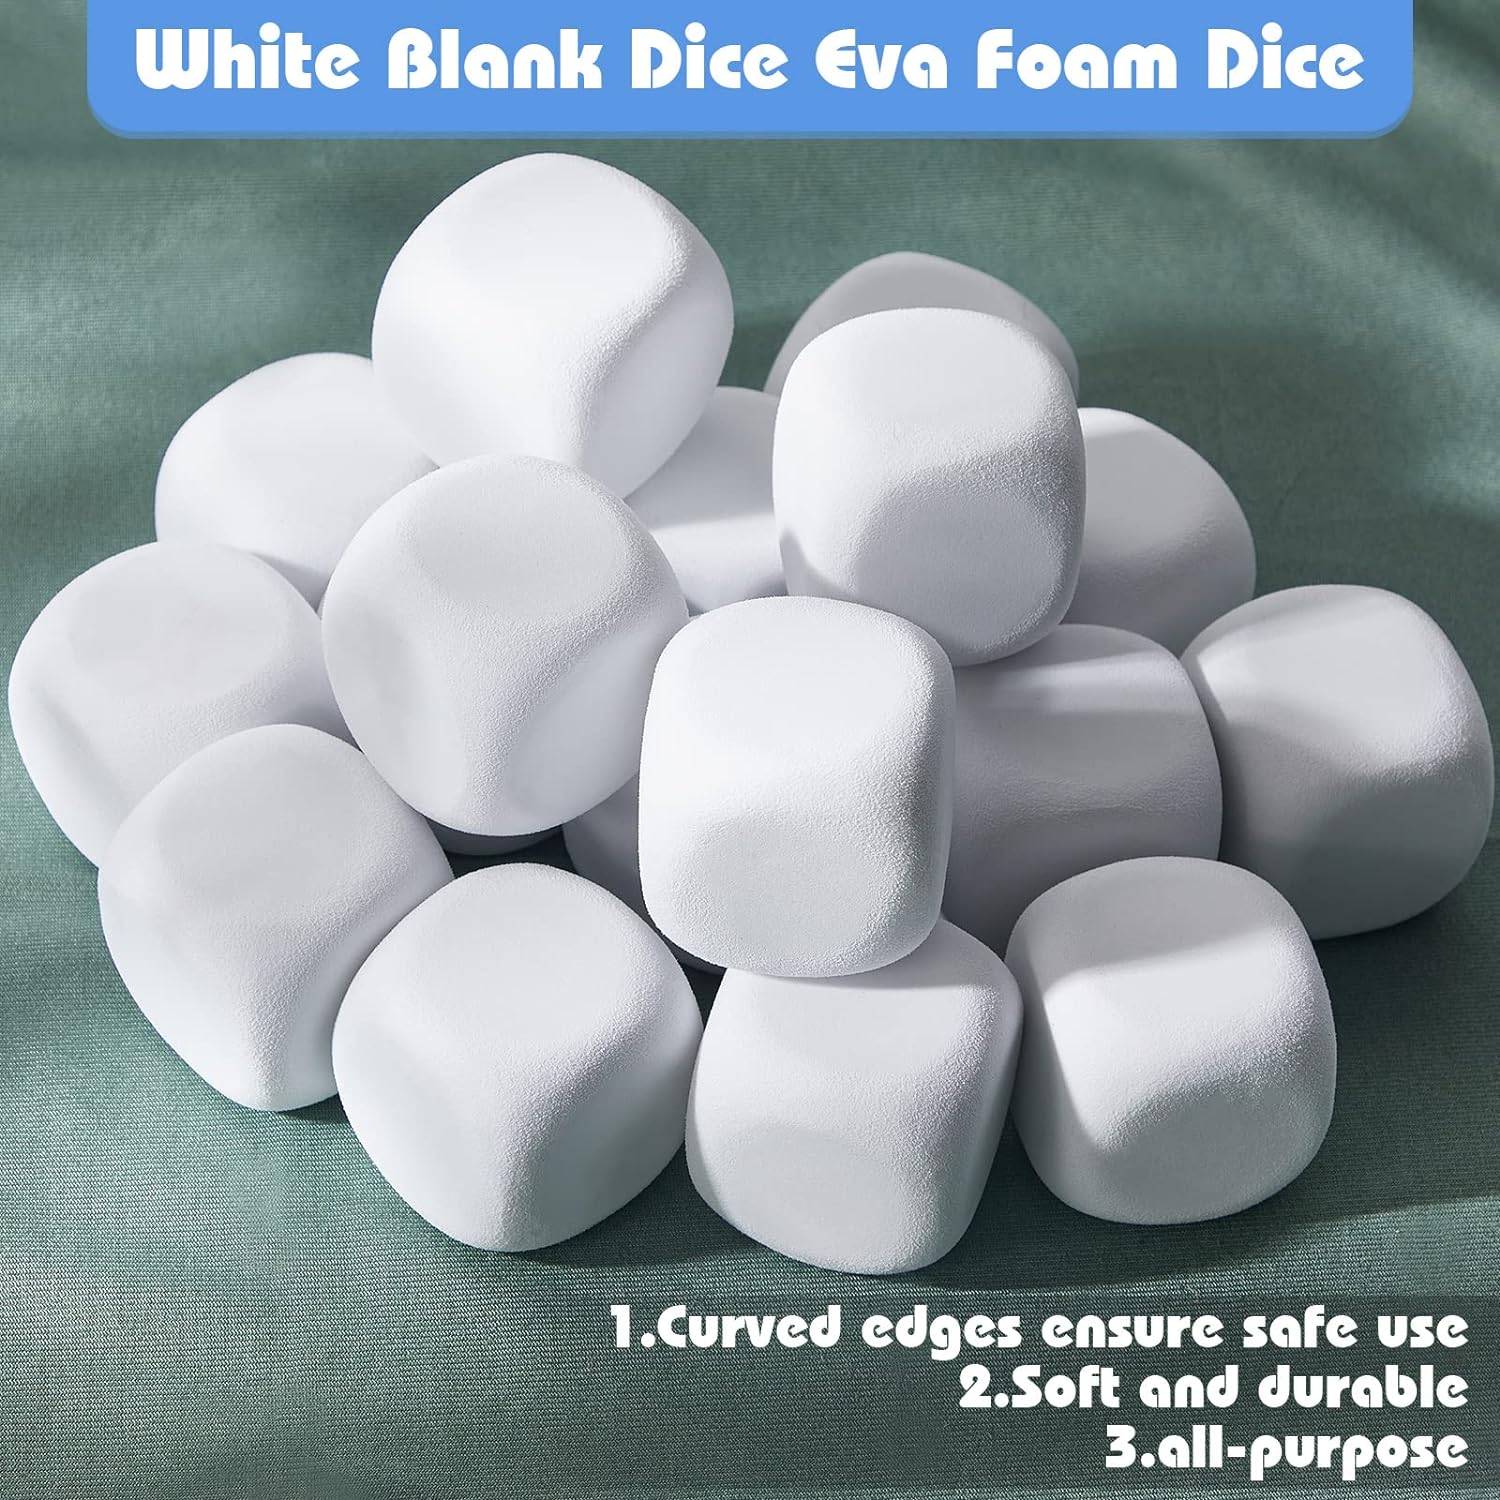 Great Choice Products 50 Pcs White Blank Dice Eva Foam Dice 1.96 Inch Graffiti Foam Blocks For Crafts Building Foam Cubes For Crafting Game Co…